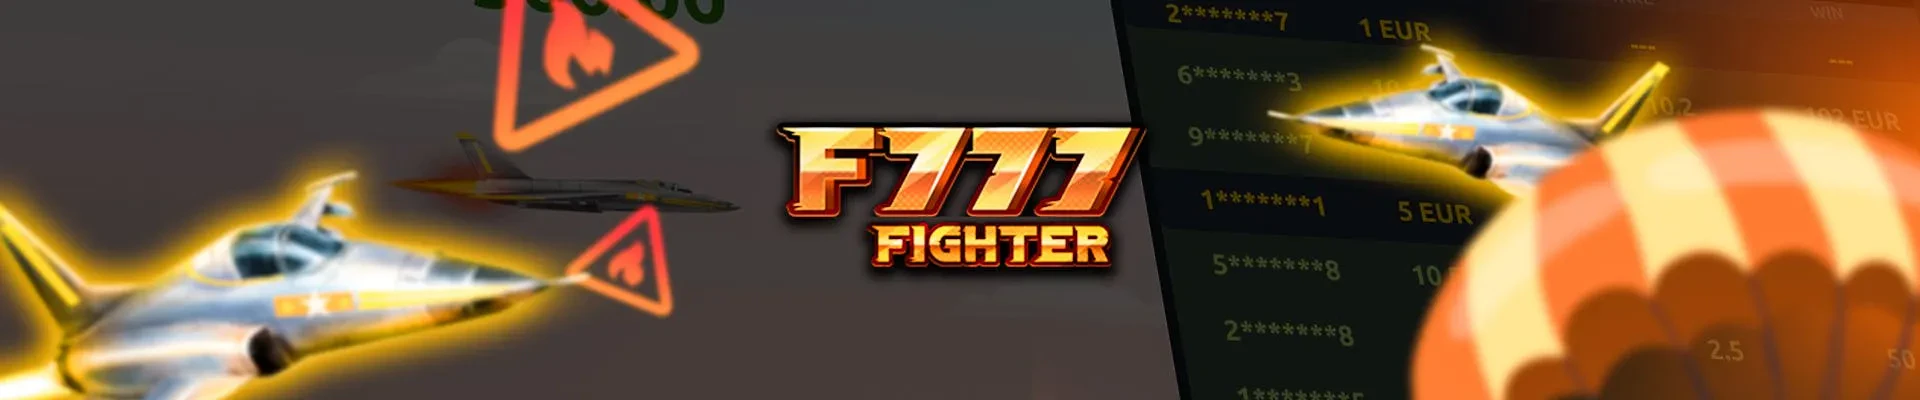 f777 fighter the new jetx